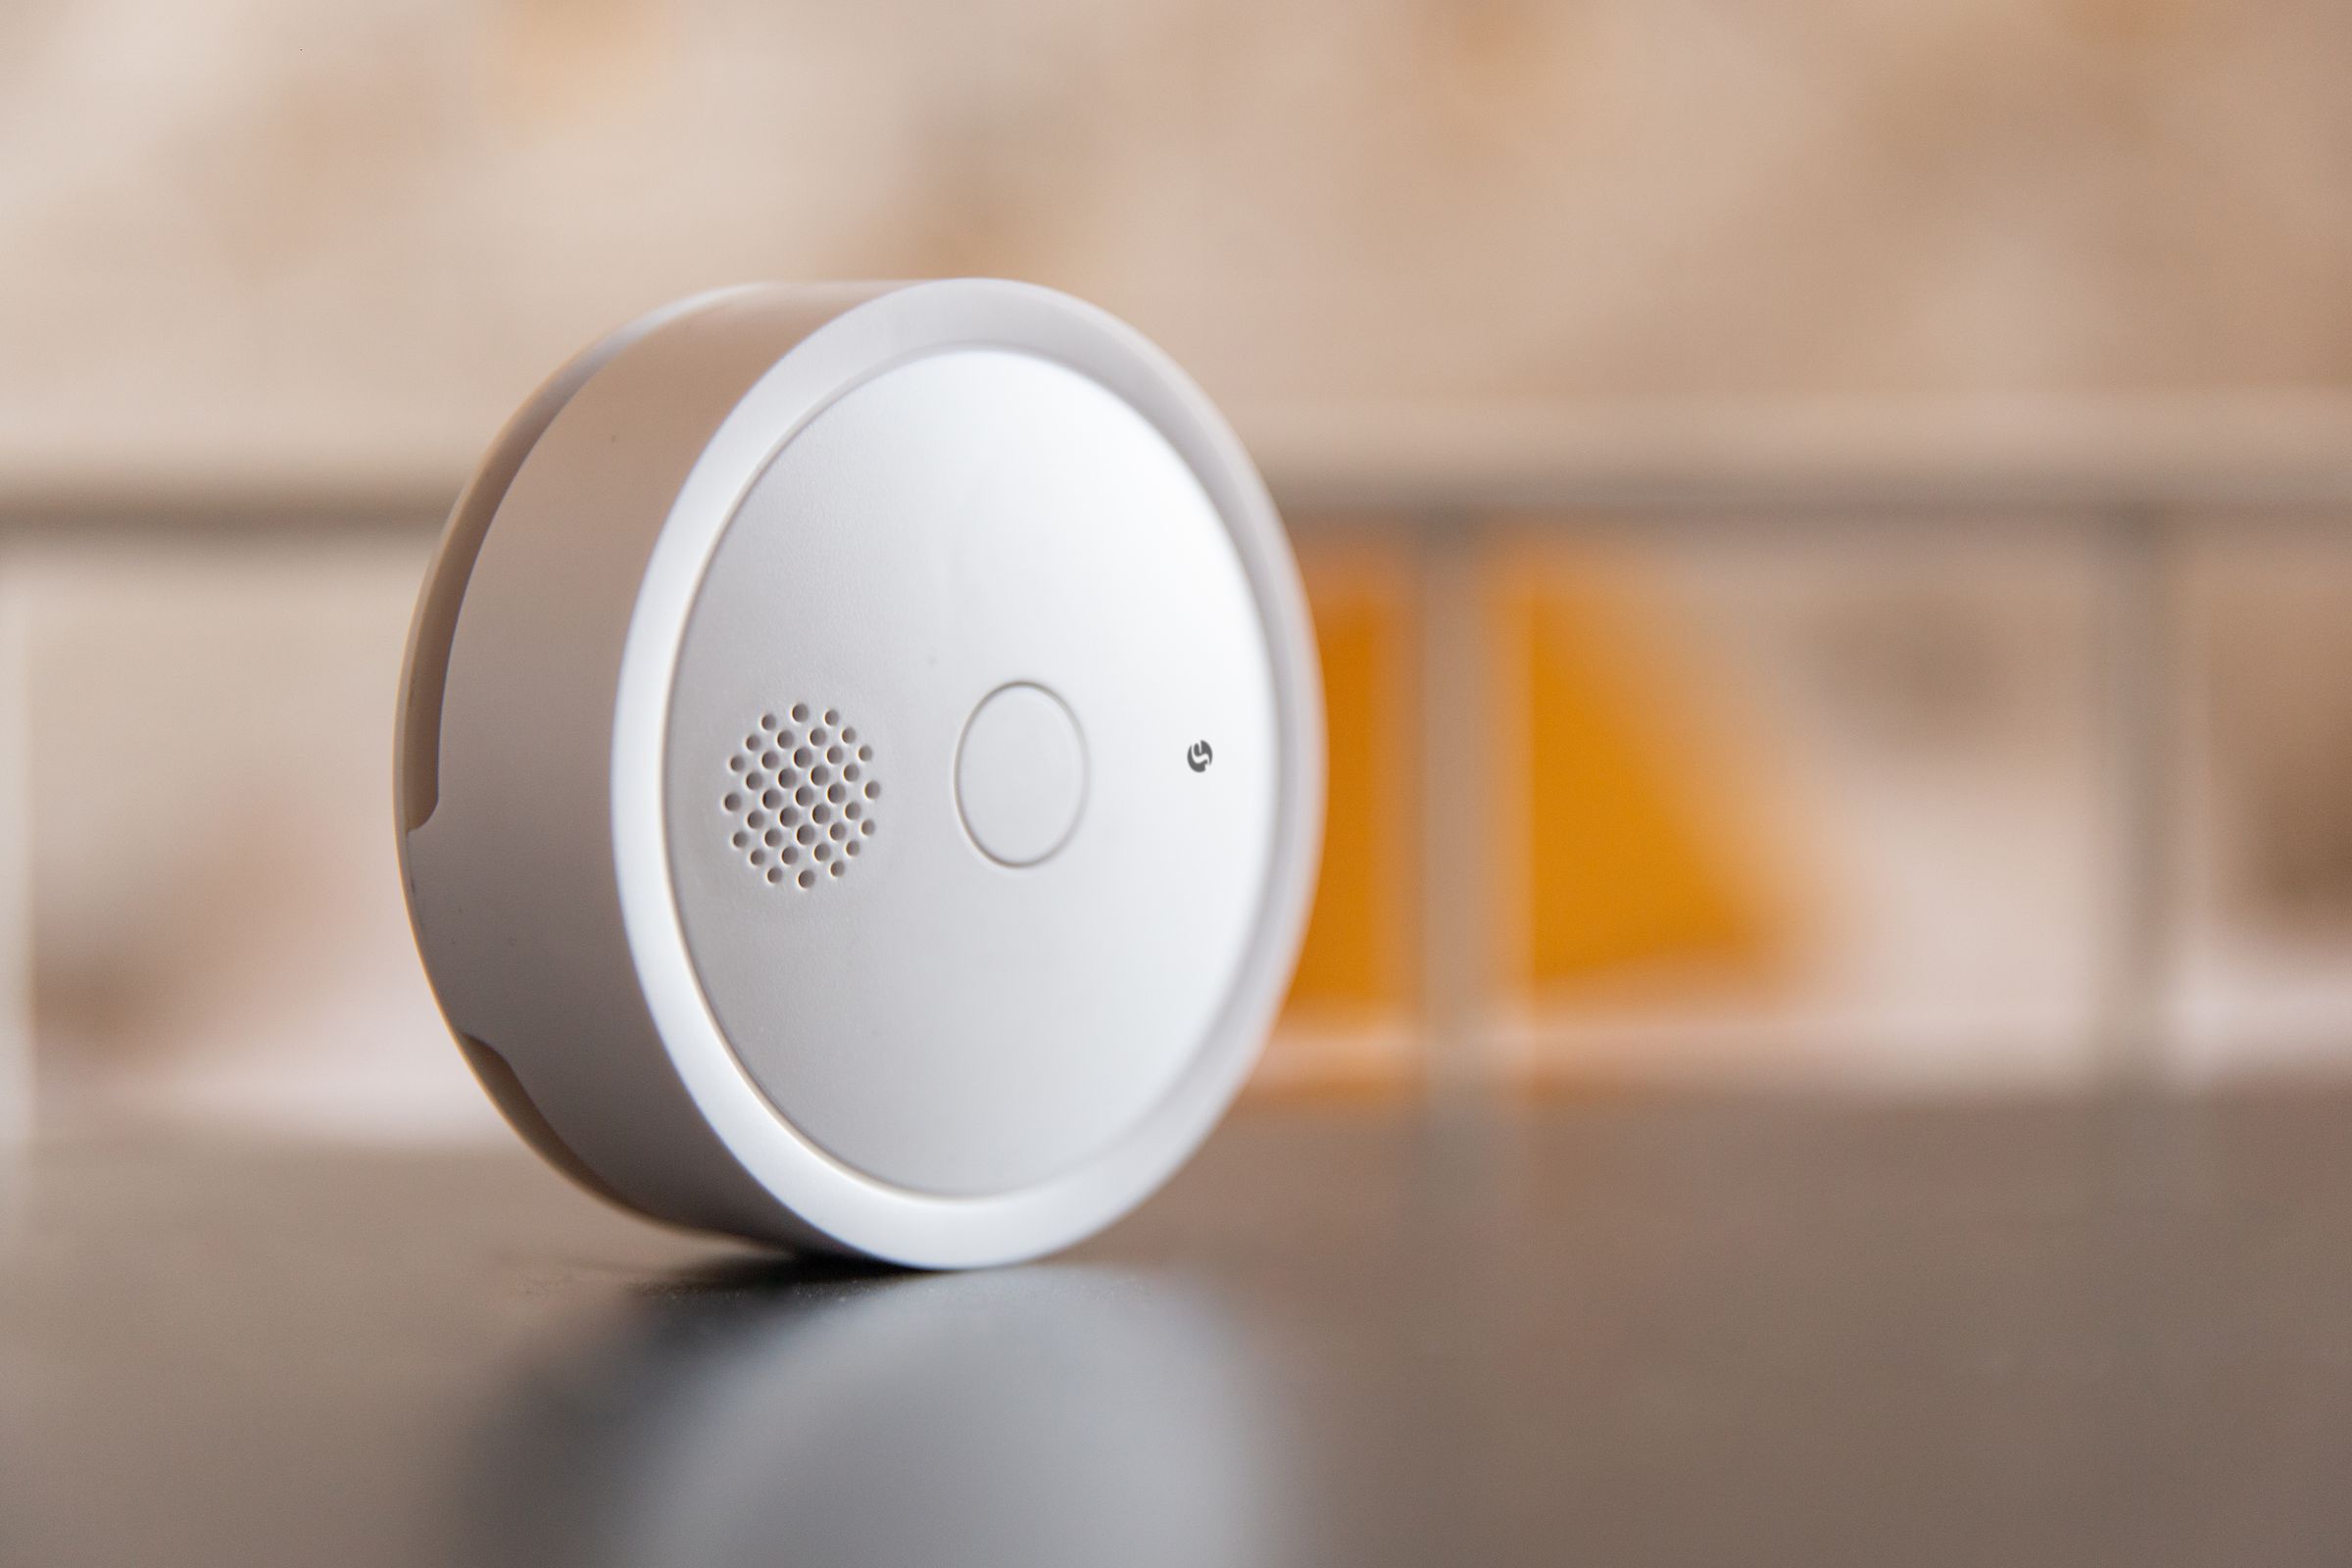 The Shelly Plus Smoke is a smart smoke alarm that works over Wi-Fi and Bluetooth.